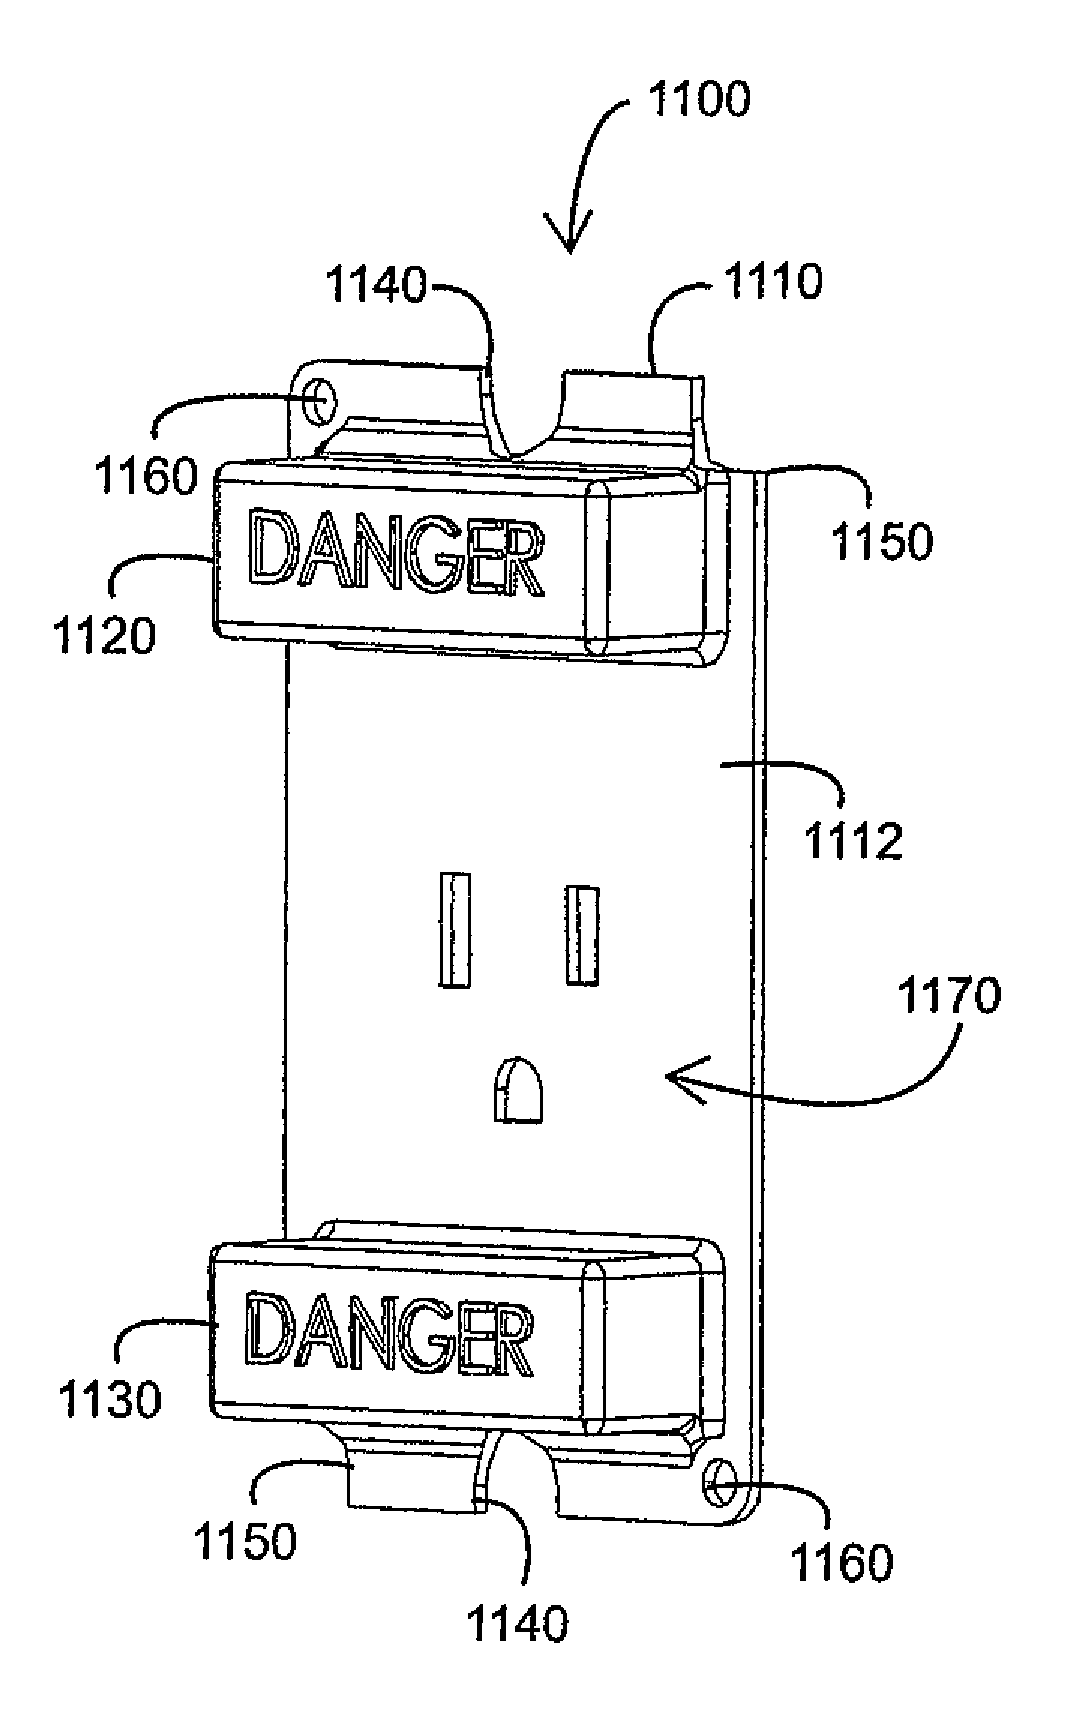 Safety electrical outlet and switch system